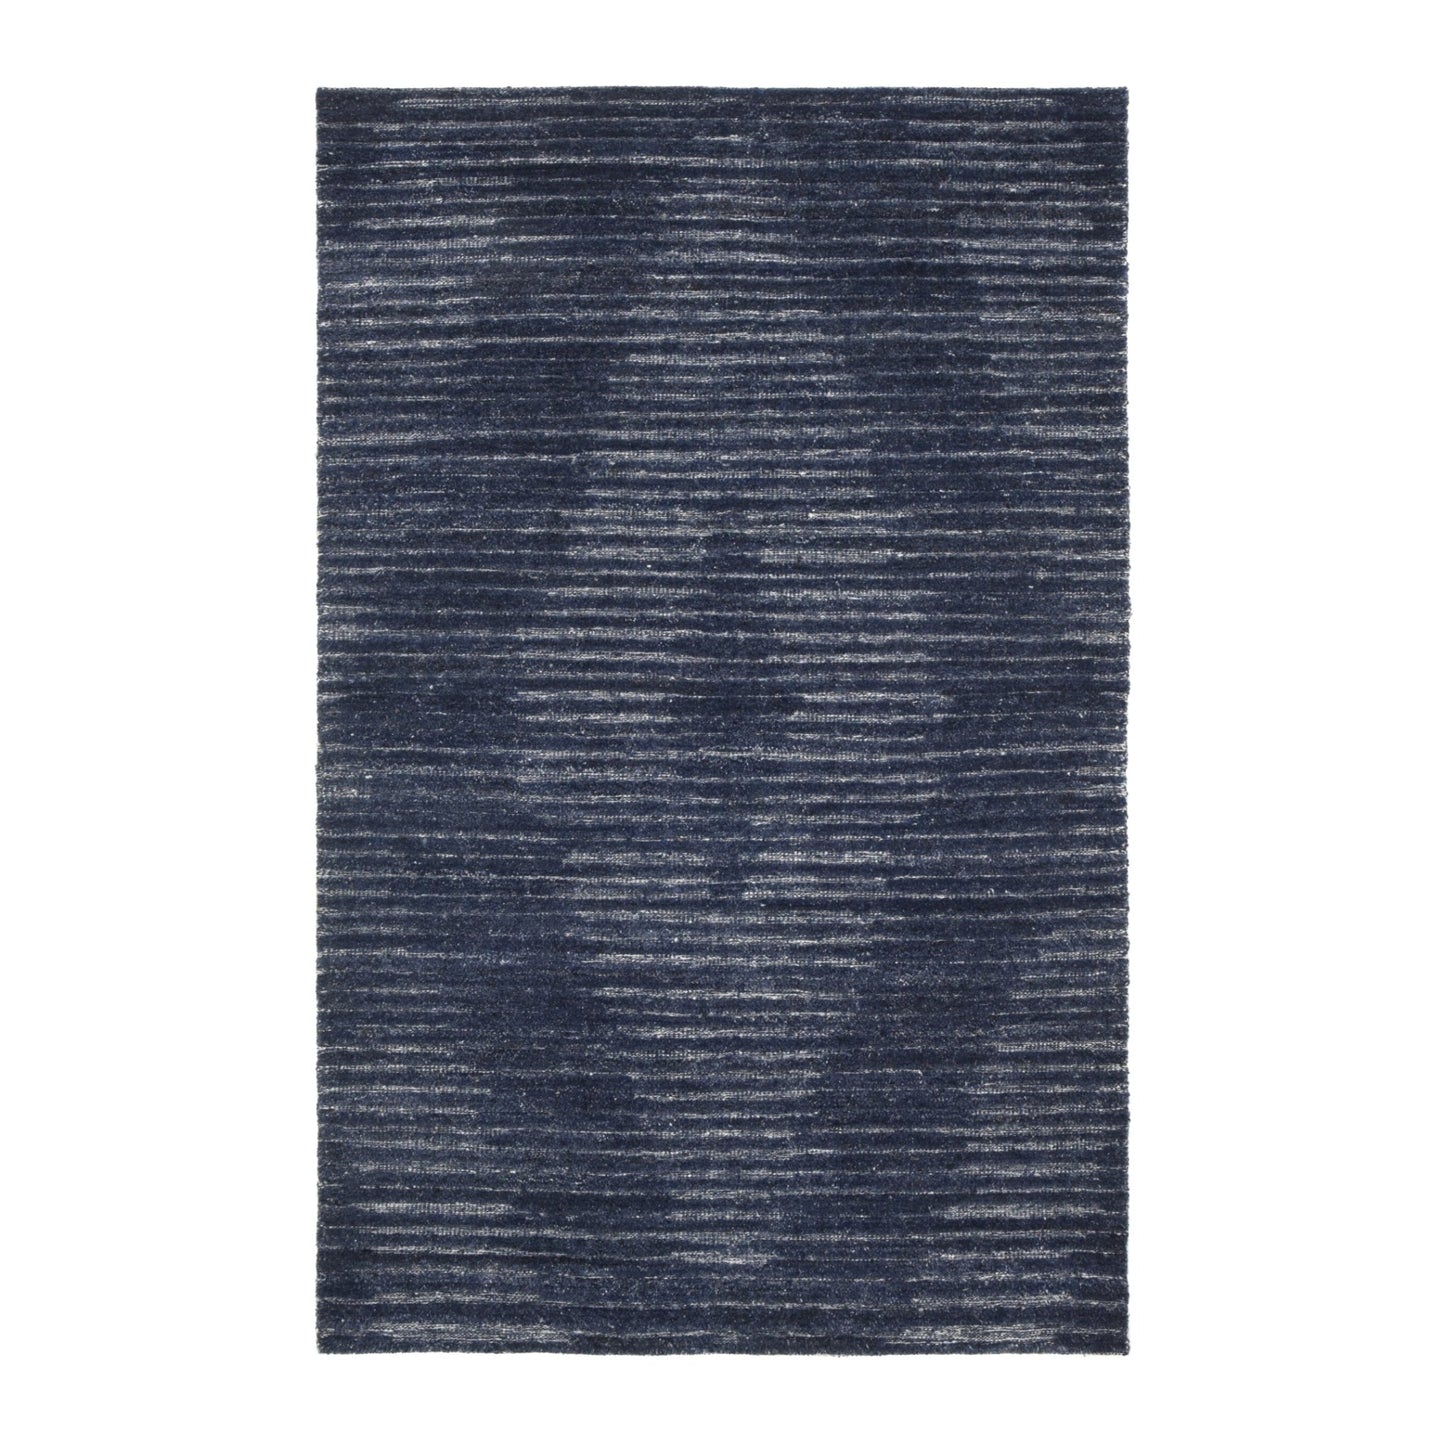 Hand Knotted Wool Rug 012 - aucentic